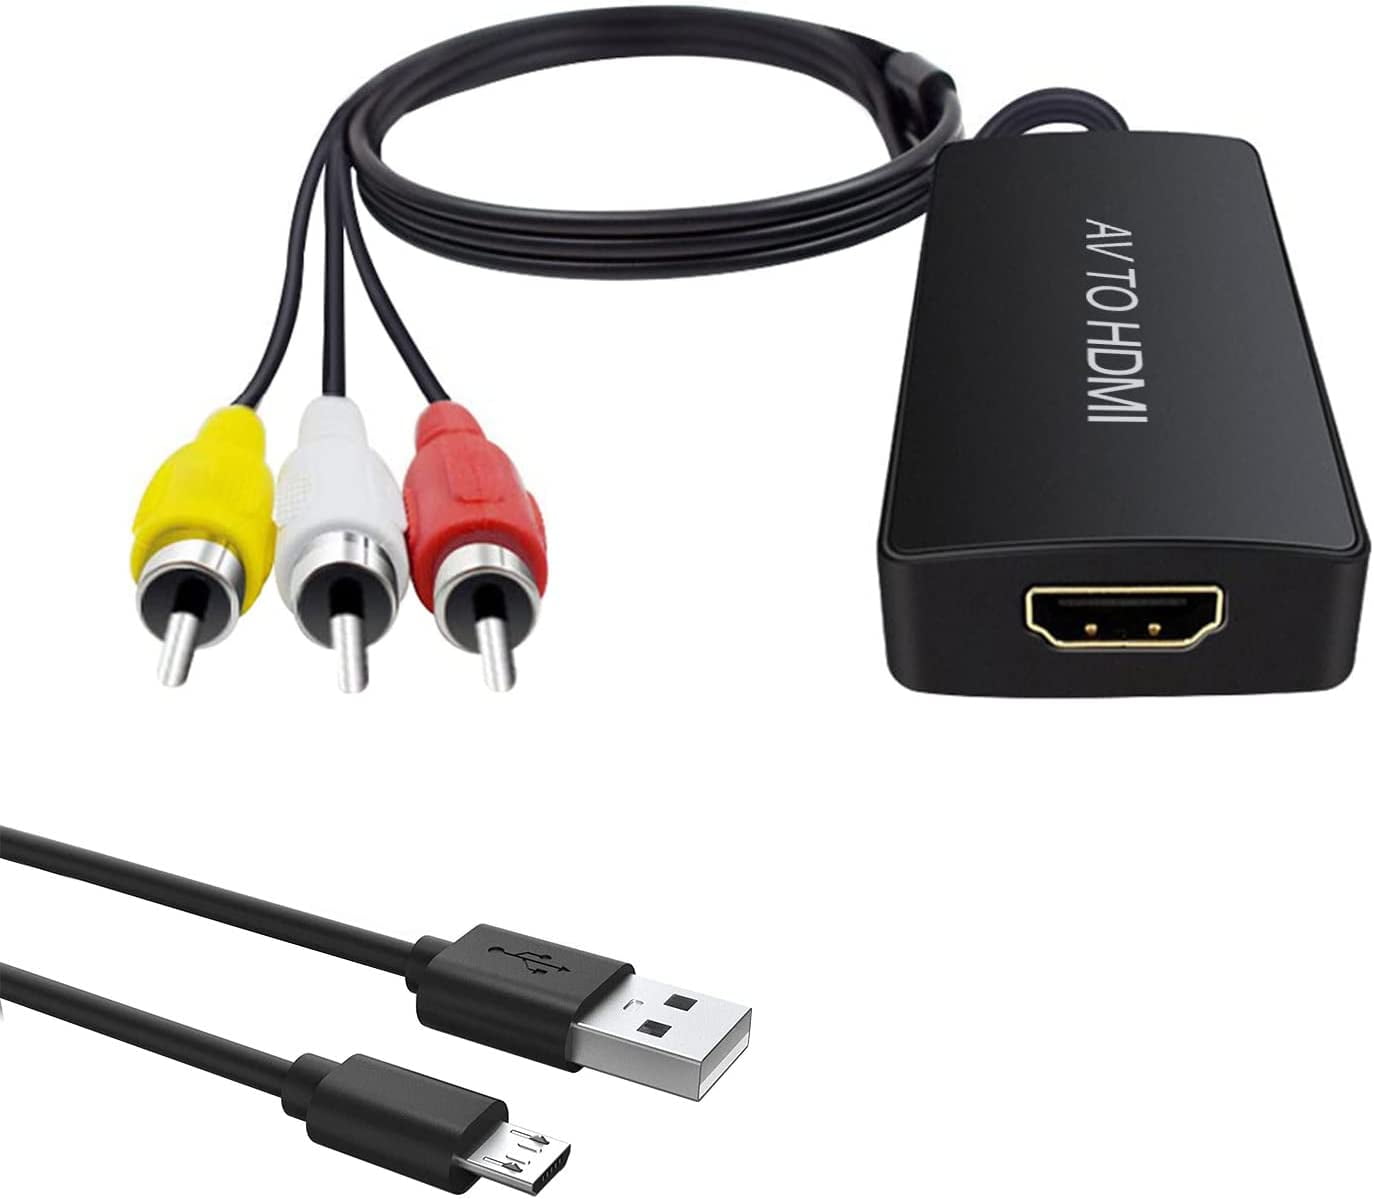 tand Vervolgen Ruimteschip Male RCA to HDMI Converter 3RCA/CVBS/AV/Composite to HDMI Converter  Adapter, Connect PS2/PS3, N64, STB, VHS, VCR, Old DVD Blu-ray Players etc.  to HDMI TV (Male RCA) - Walmart.com